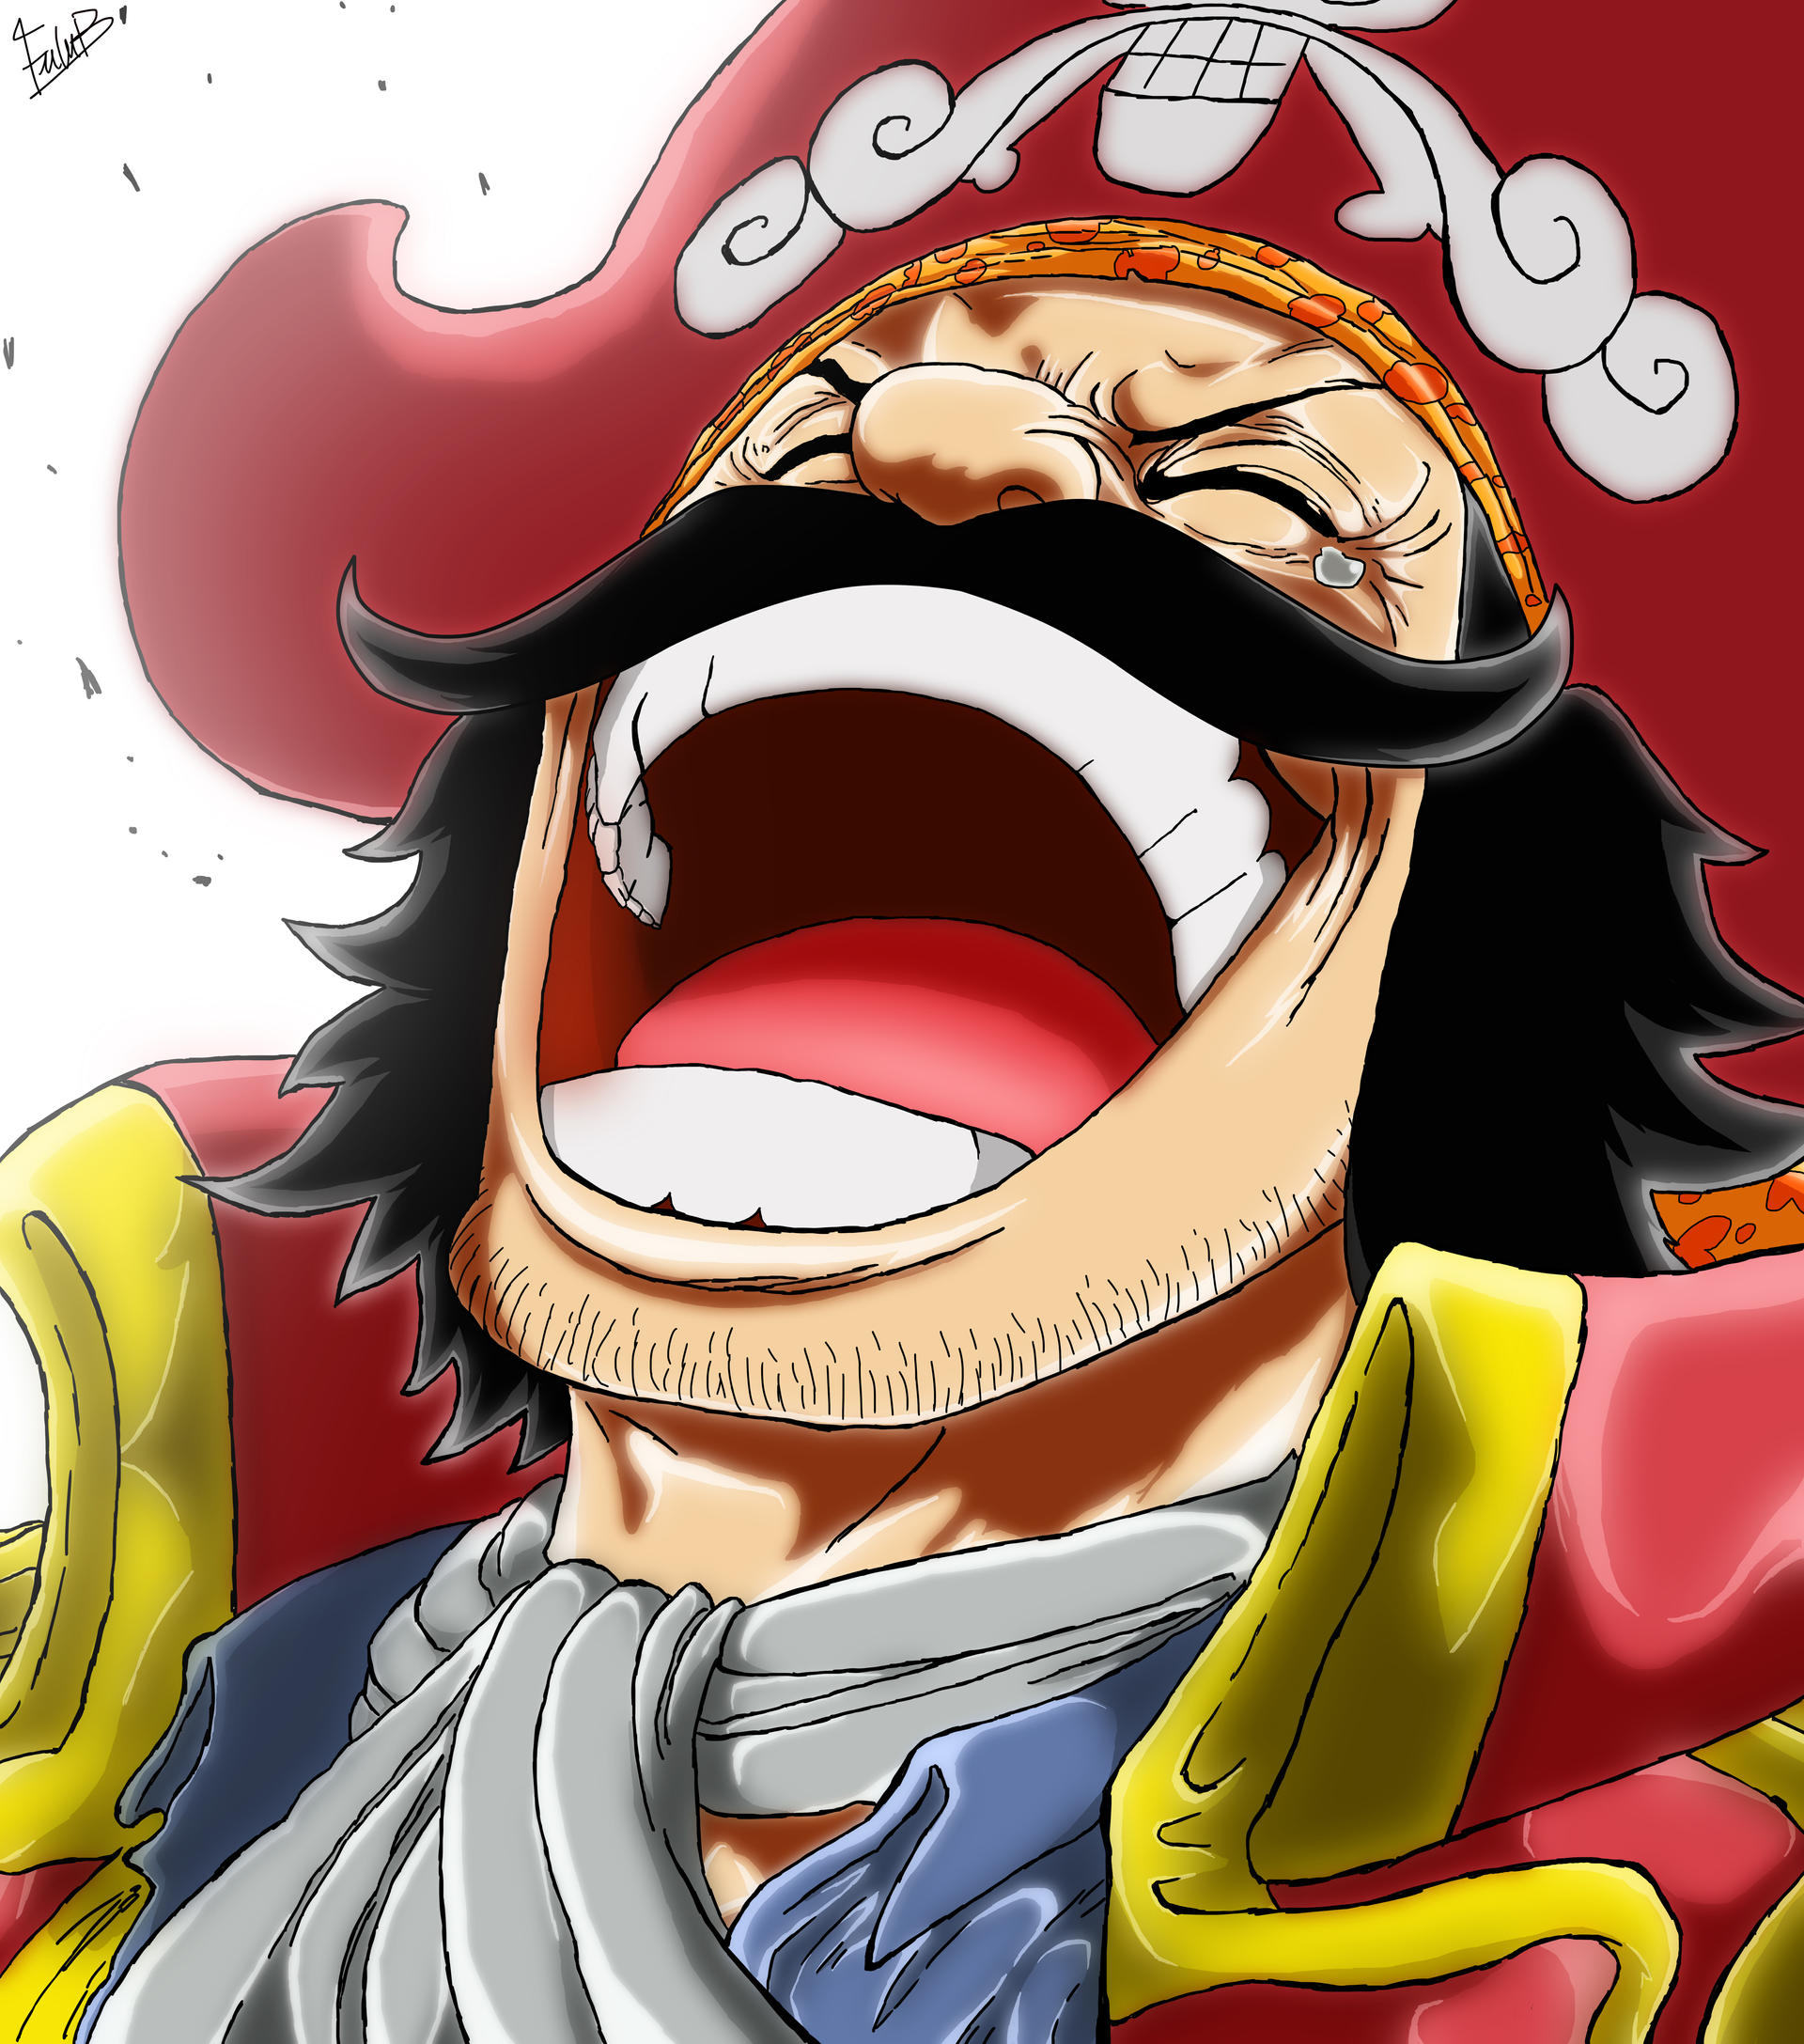 The Pirate King Gol D Roger By Elpipe3000 On Deviantart